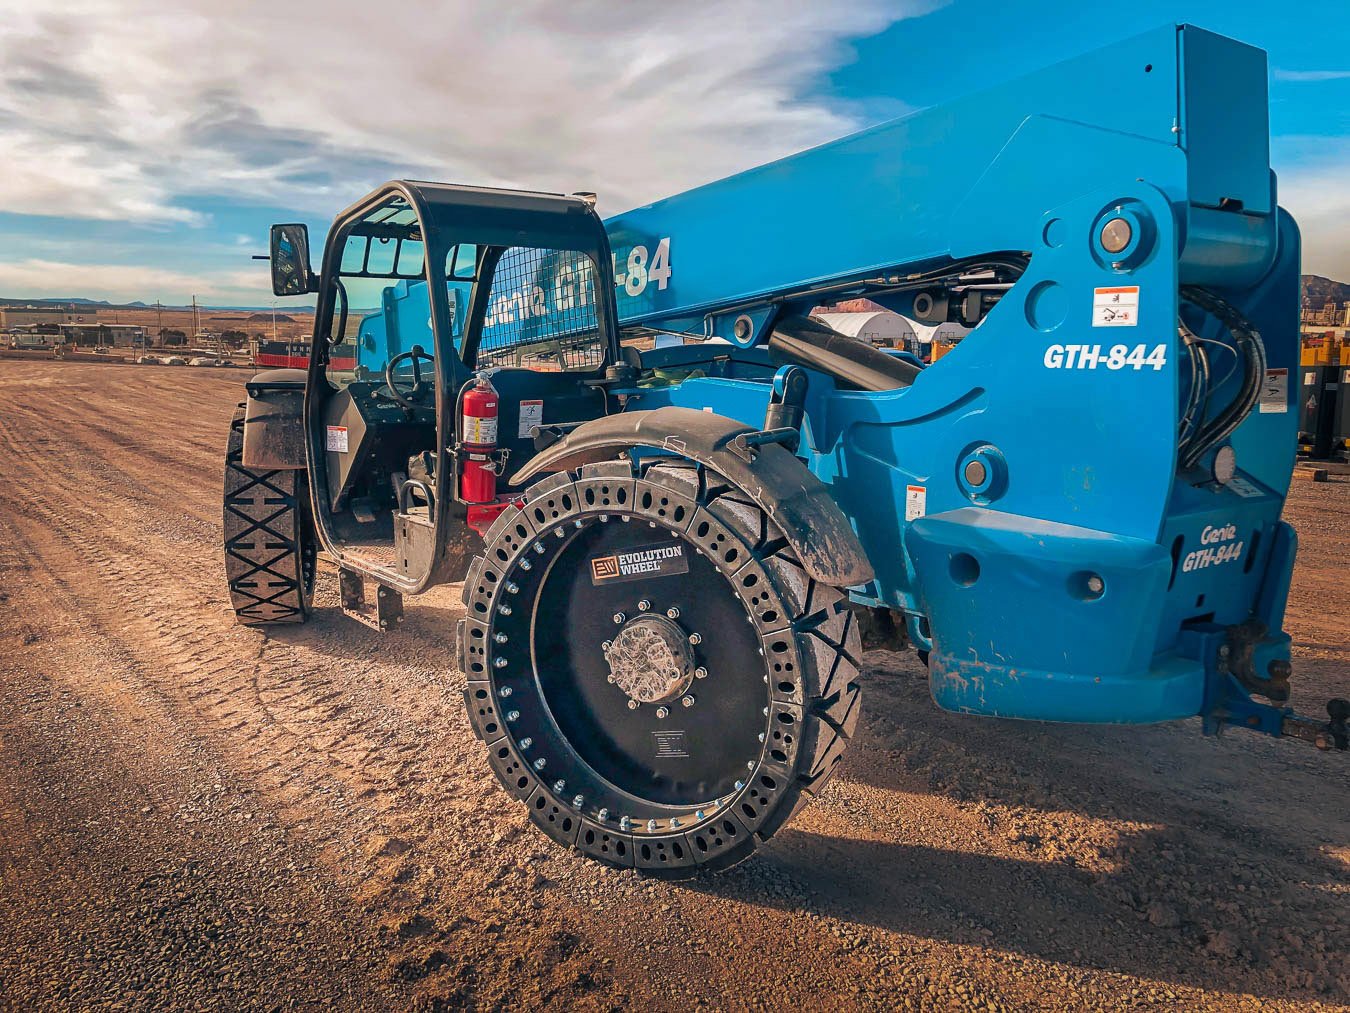 This image shows our Gradall telehandler tires for a blue Genie telehandler.